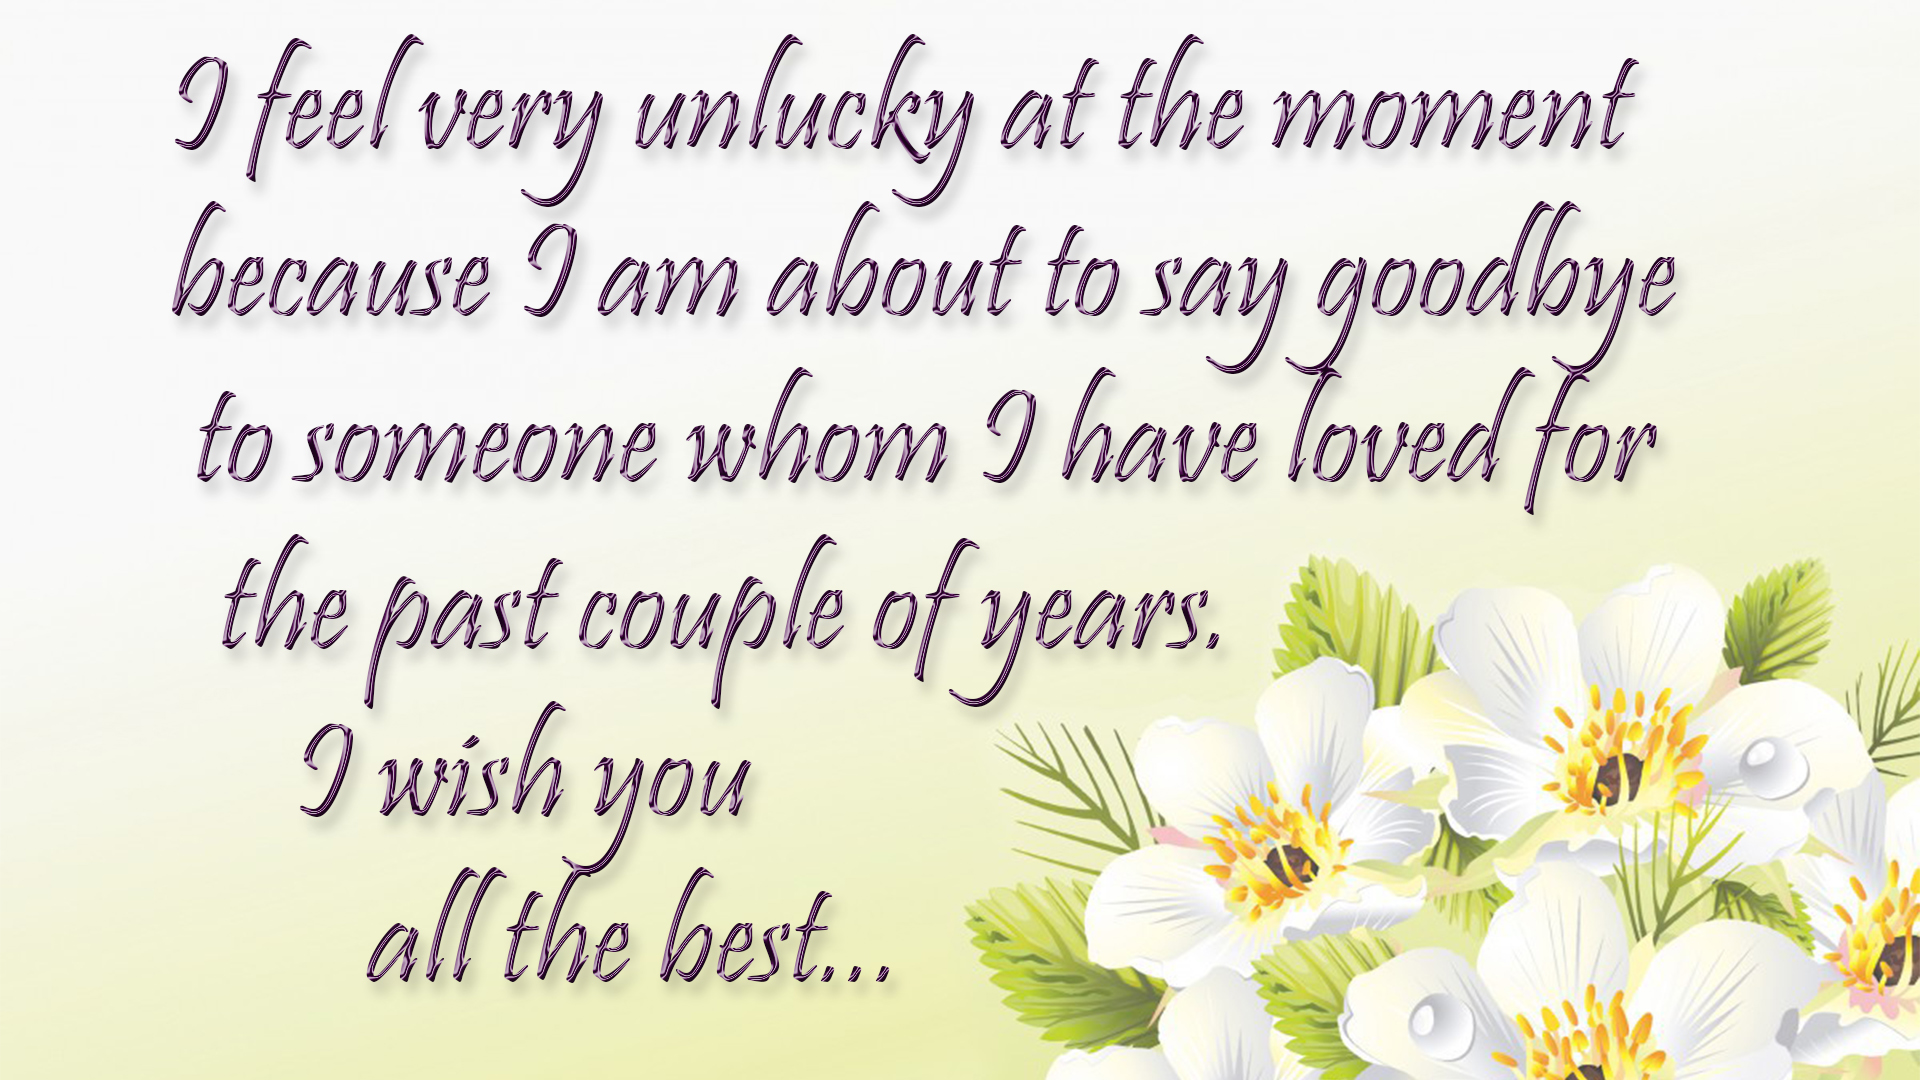 Farewell Wishes Messages Amp Cards Images Wishes Messages Wish Quotes ...